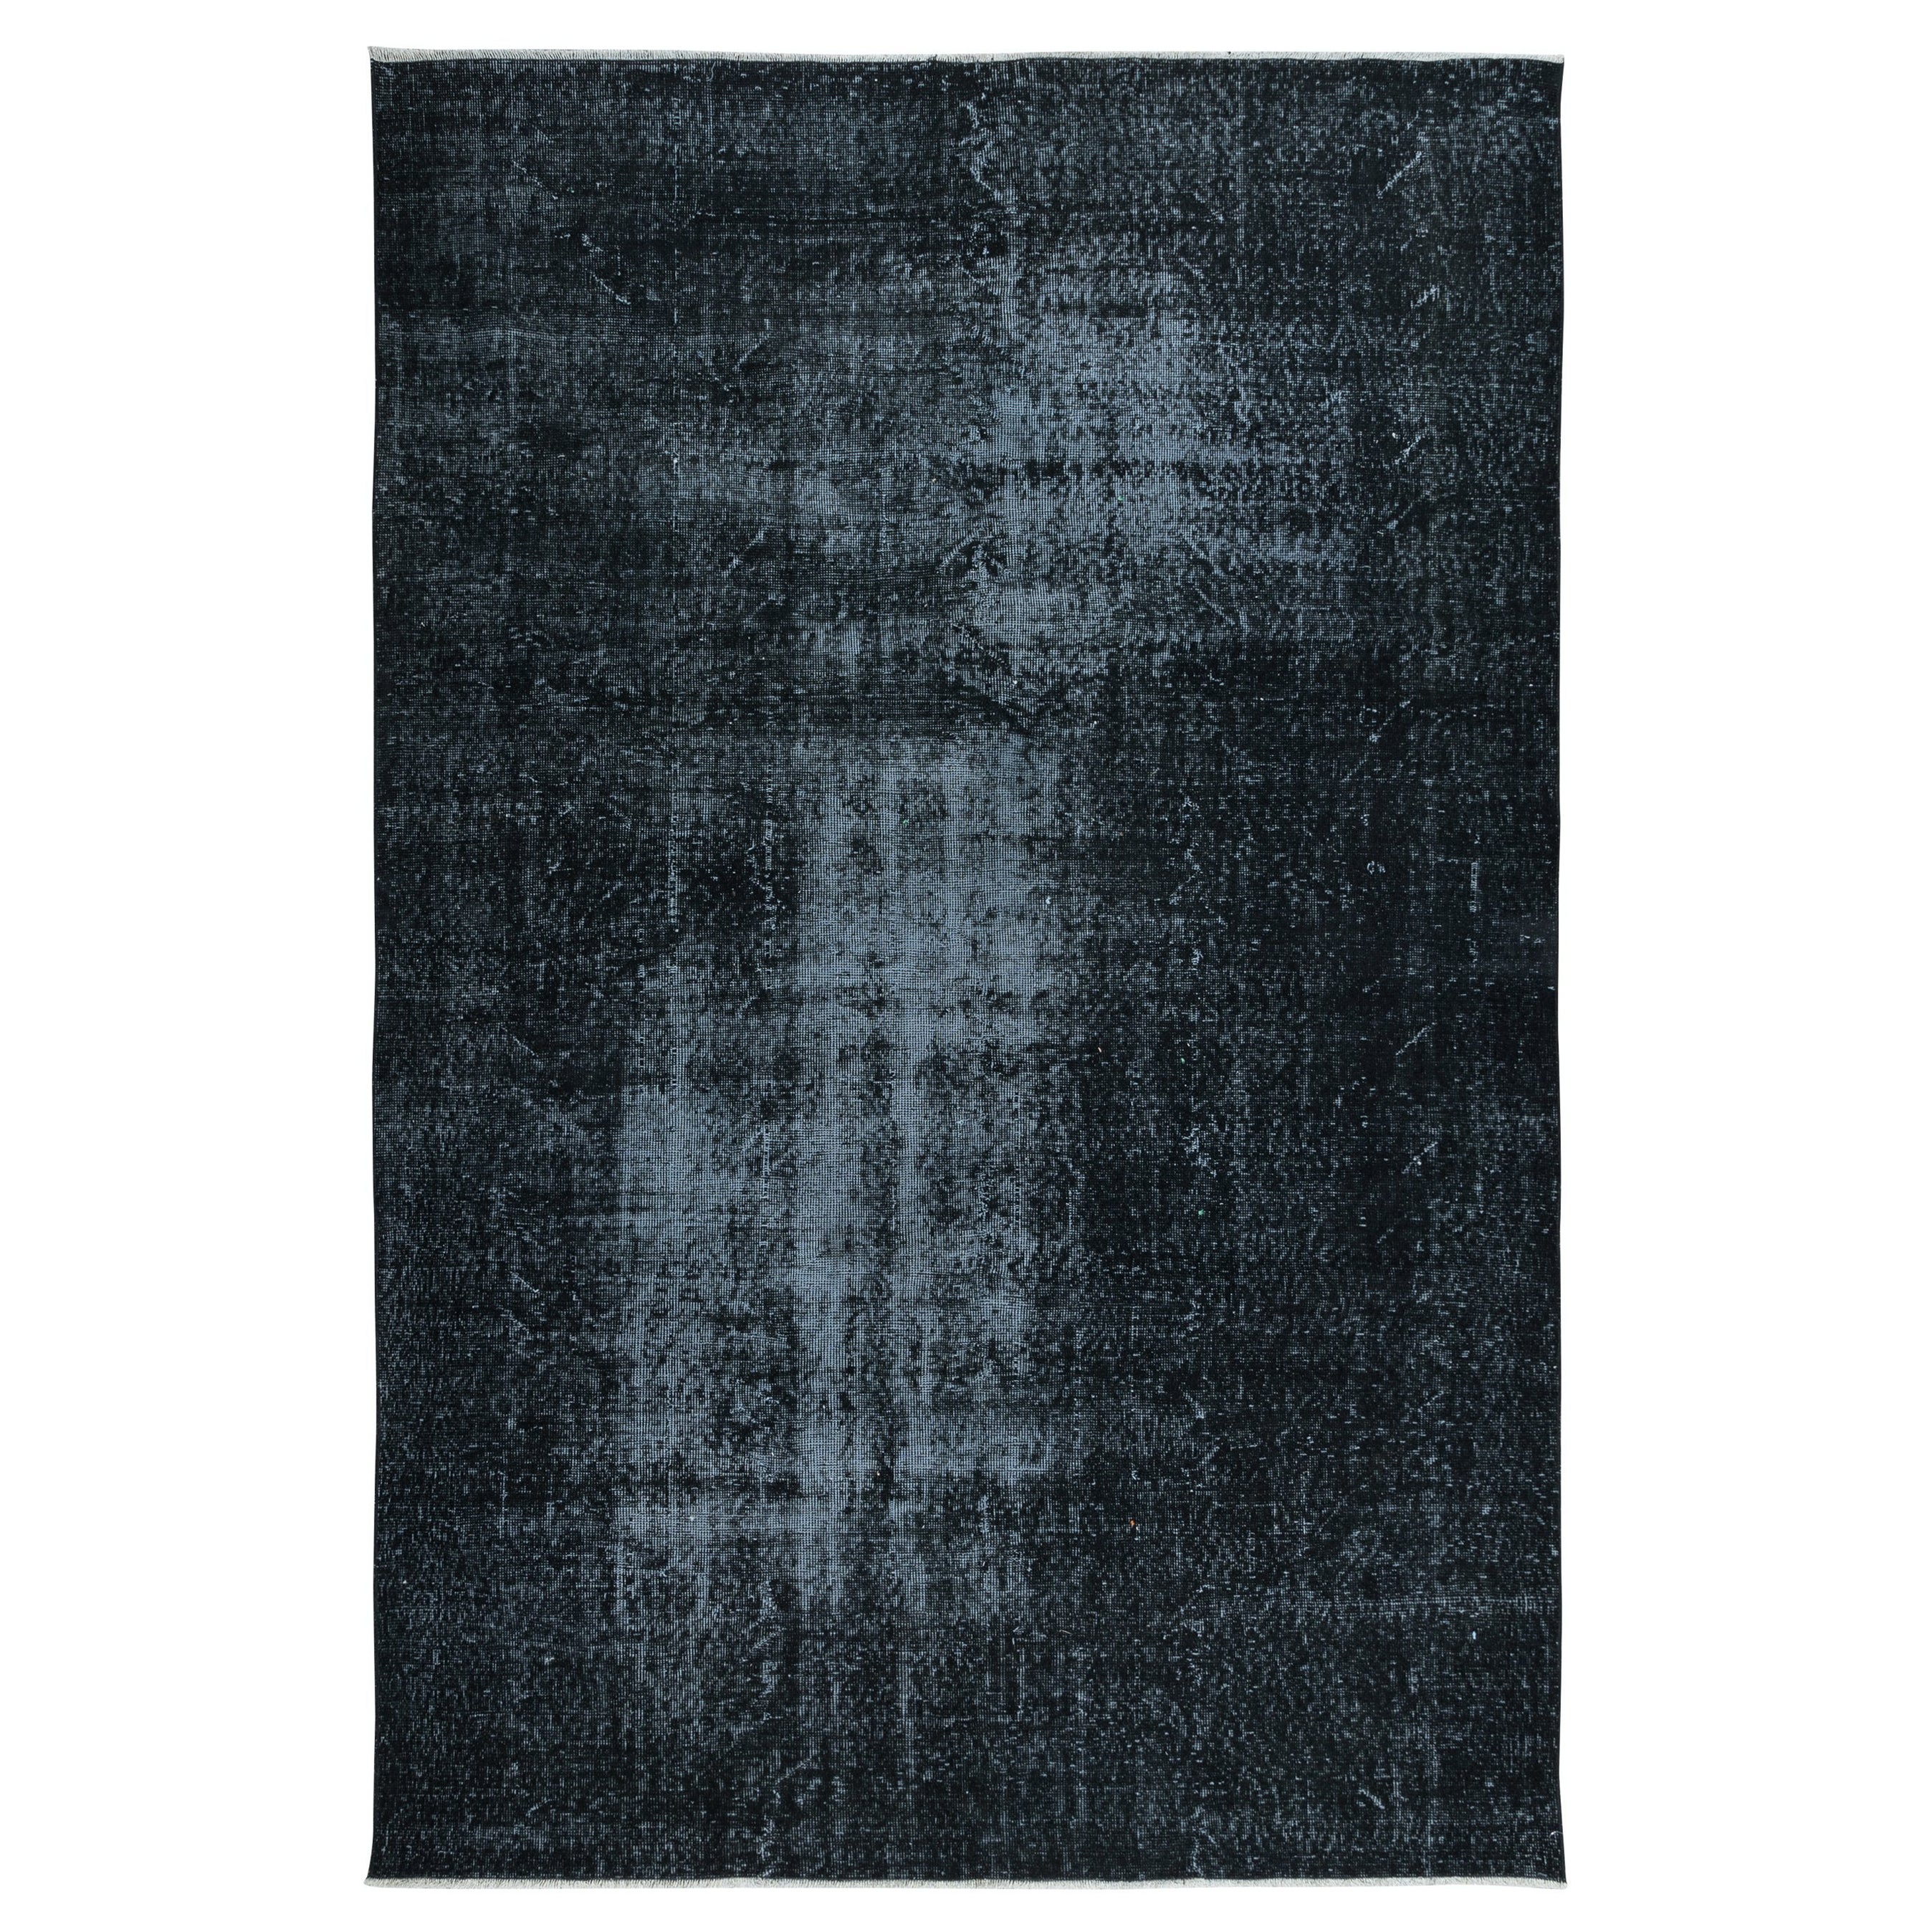 6.7x9.7 Ft Black Abstract Area Rug, Handmade in Turkey, Modern Upcycled Carpet